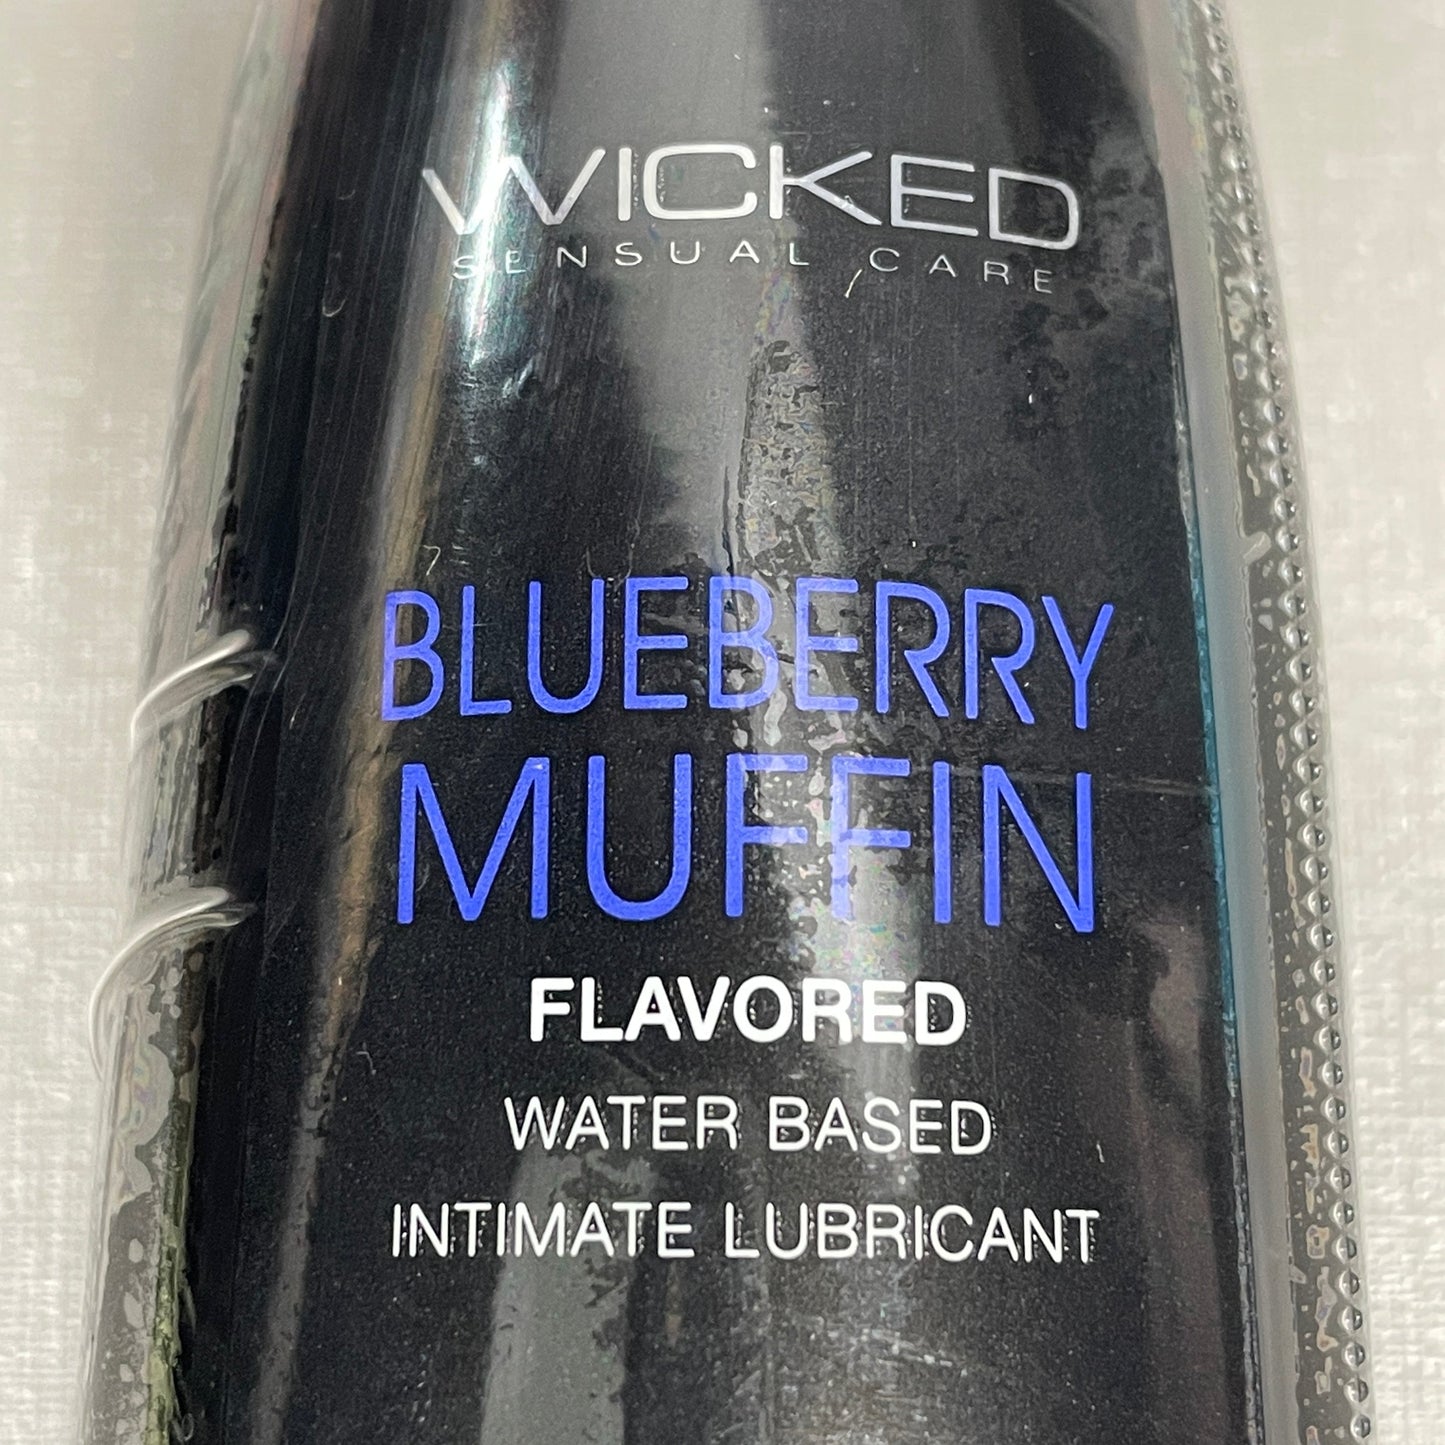 WICKED SENSUAL CARE 6 Pack Blueberry Muffin Flavored Water Based Intimate Lubricant 2 oz Exp 11/23 (New)